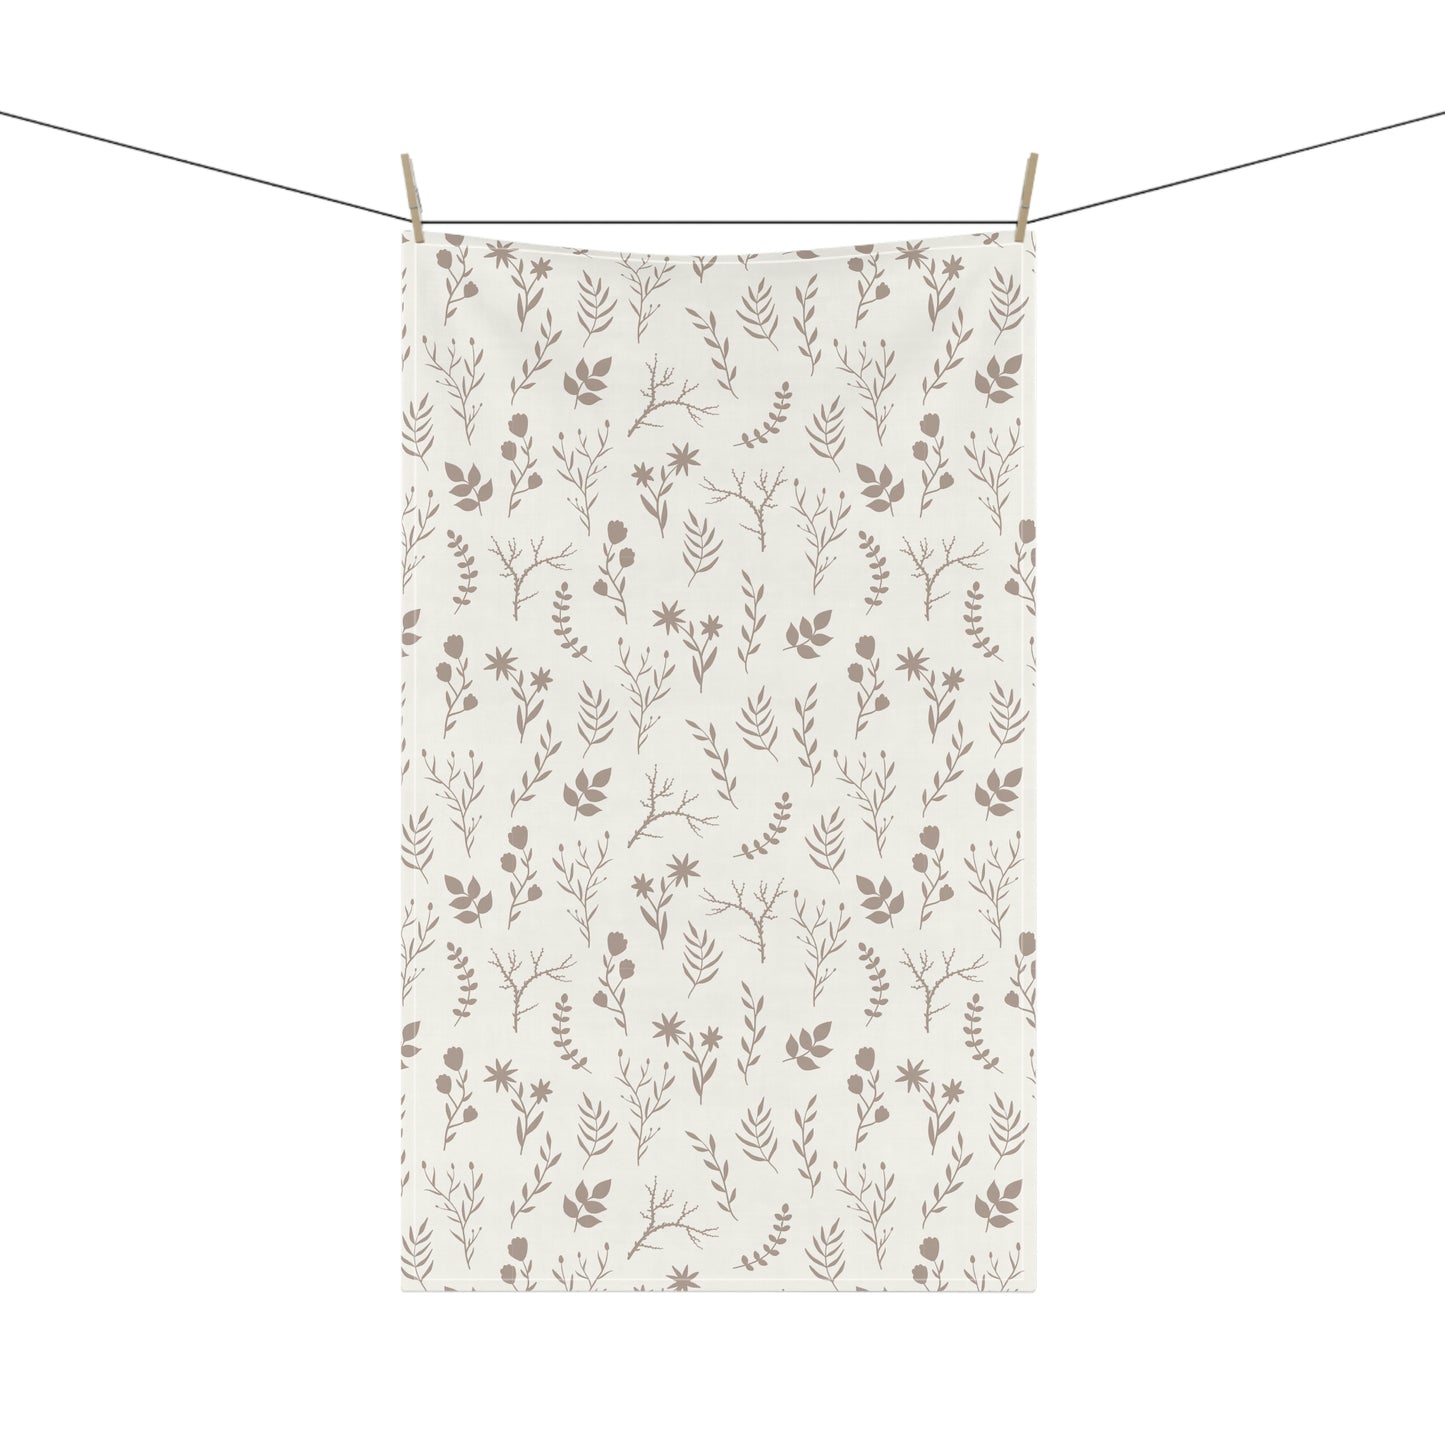 Taupe and White Floral Dish Towel